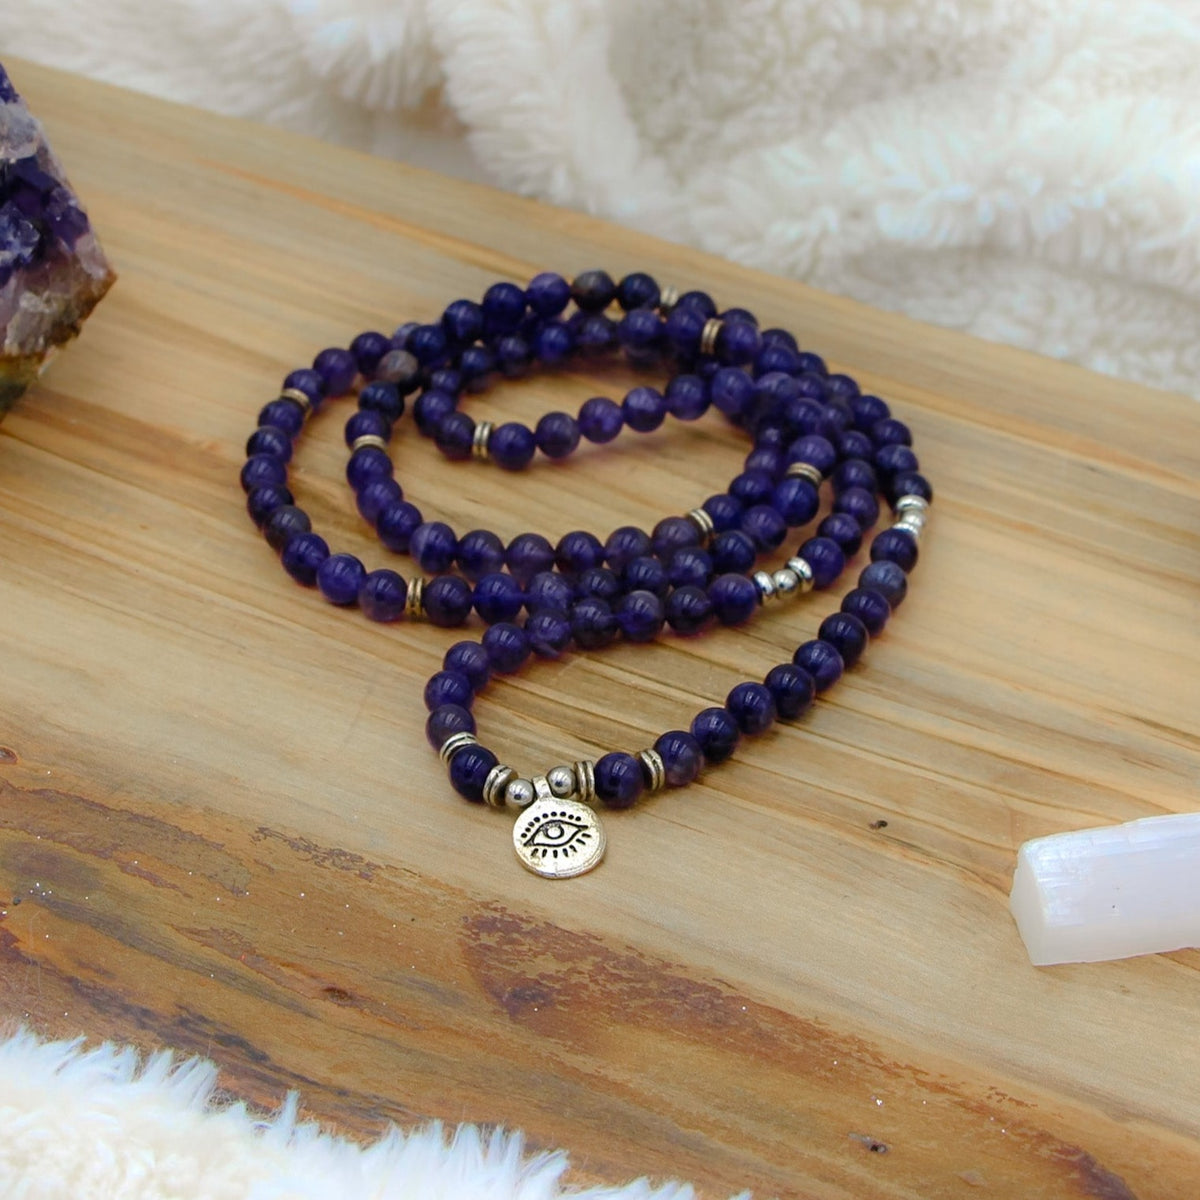 mala bead necklace, amethyst mala necklace, amethyst beaded necklace, third eye necklace, evil eye necklace, intuition necklace, anxiety jewelry,